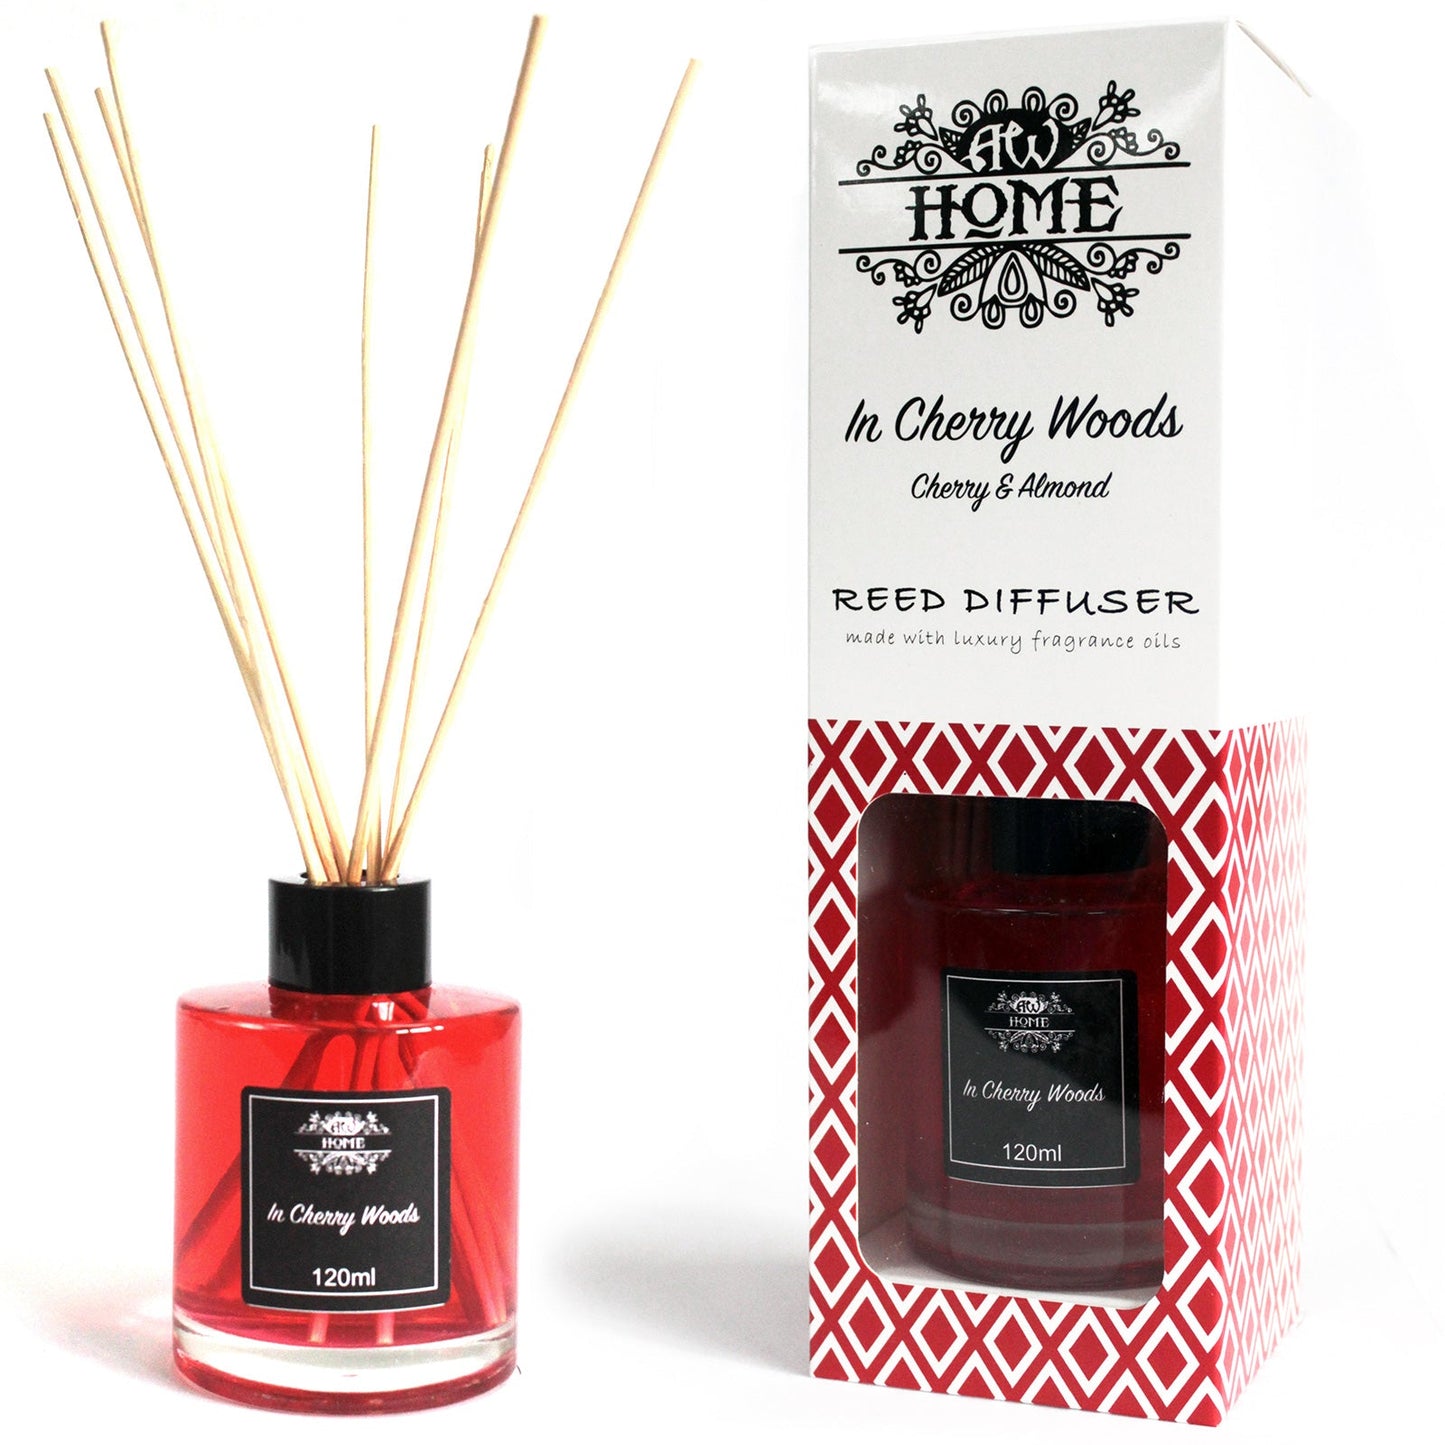 Home Fragrance Reed Diffuser - Various Fragrances - 120ml Home Fragrance Reed Diffusers - 120ml Soul Inspired In Cherry Woods 